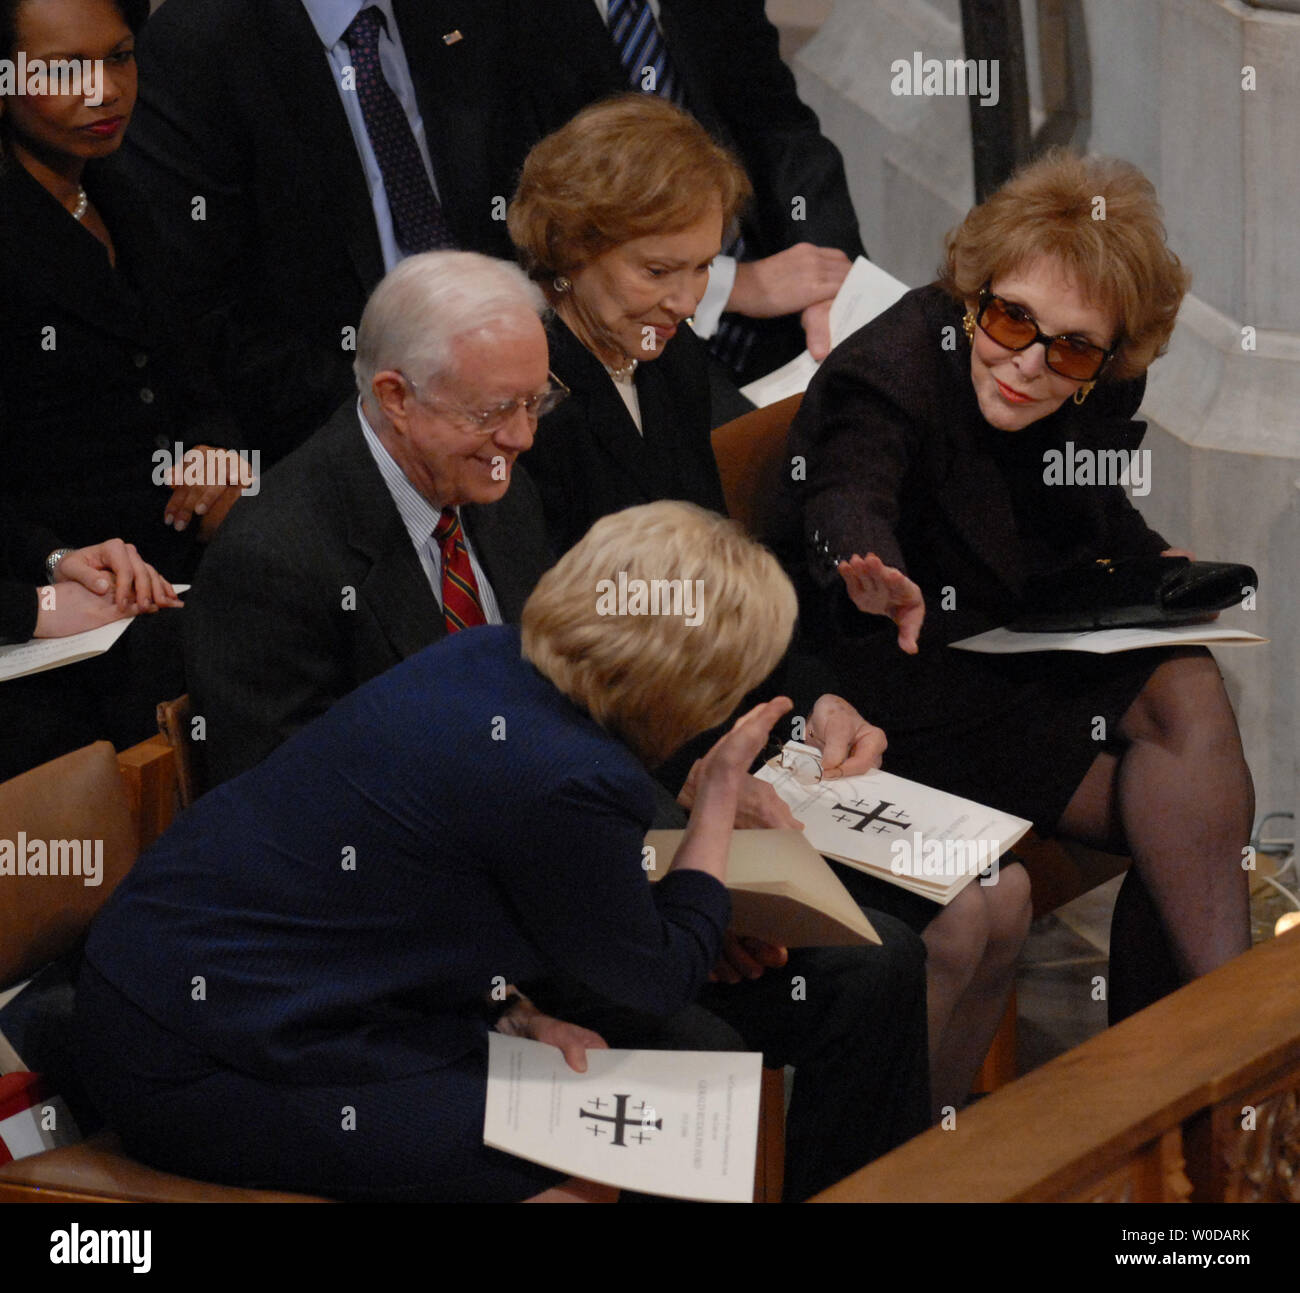 Lynne Cheney (L) leans over former President Jimmy Carter and wife Rosalyn to greet Nancy Reagan before the State Funeral  held for former President Gerald R. Ford at Washington National Cathedral in Washington on January 2, 2007. Ford passed away on December 26, 2006 at the age of 93.  (UPI Photo/Roger L. Wollenberg) Stock Photo